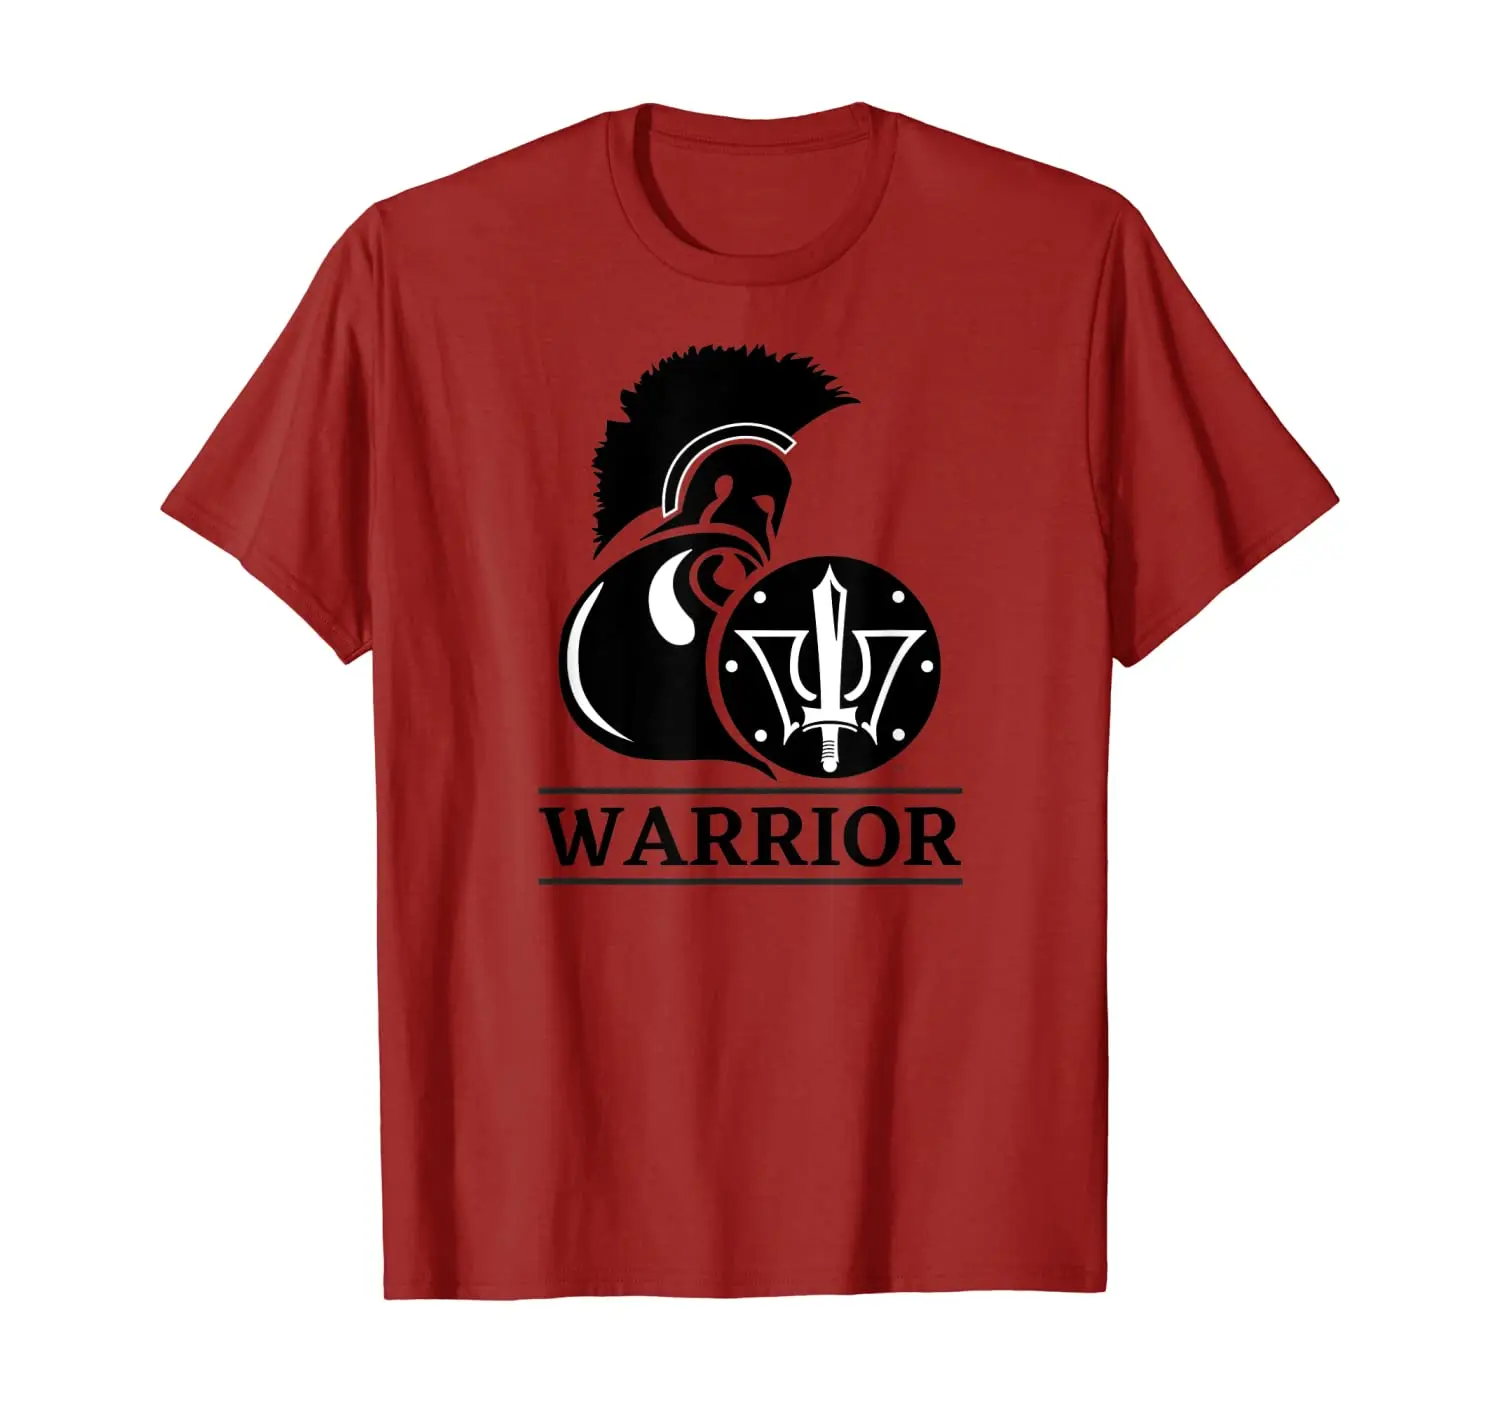 

Armed Forces Military Soldier Warrior Army Spartan T-Shirt. Summer Cotton Short Sleeve O-Neck Men's T Shirt New S-3XL